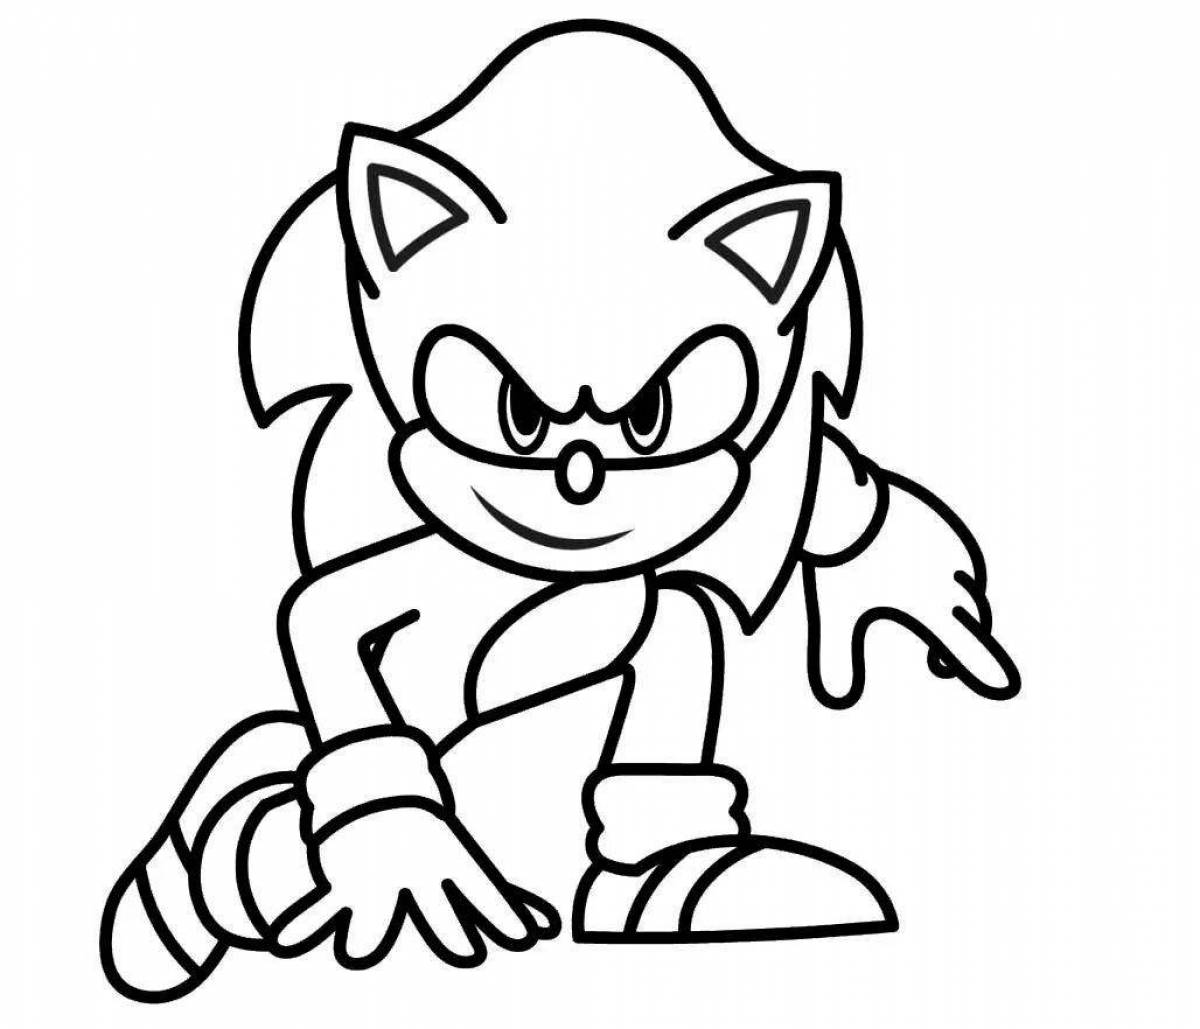 Super sonic exe mysterious coloring book